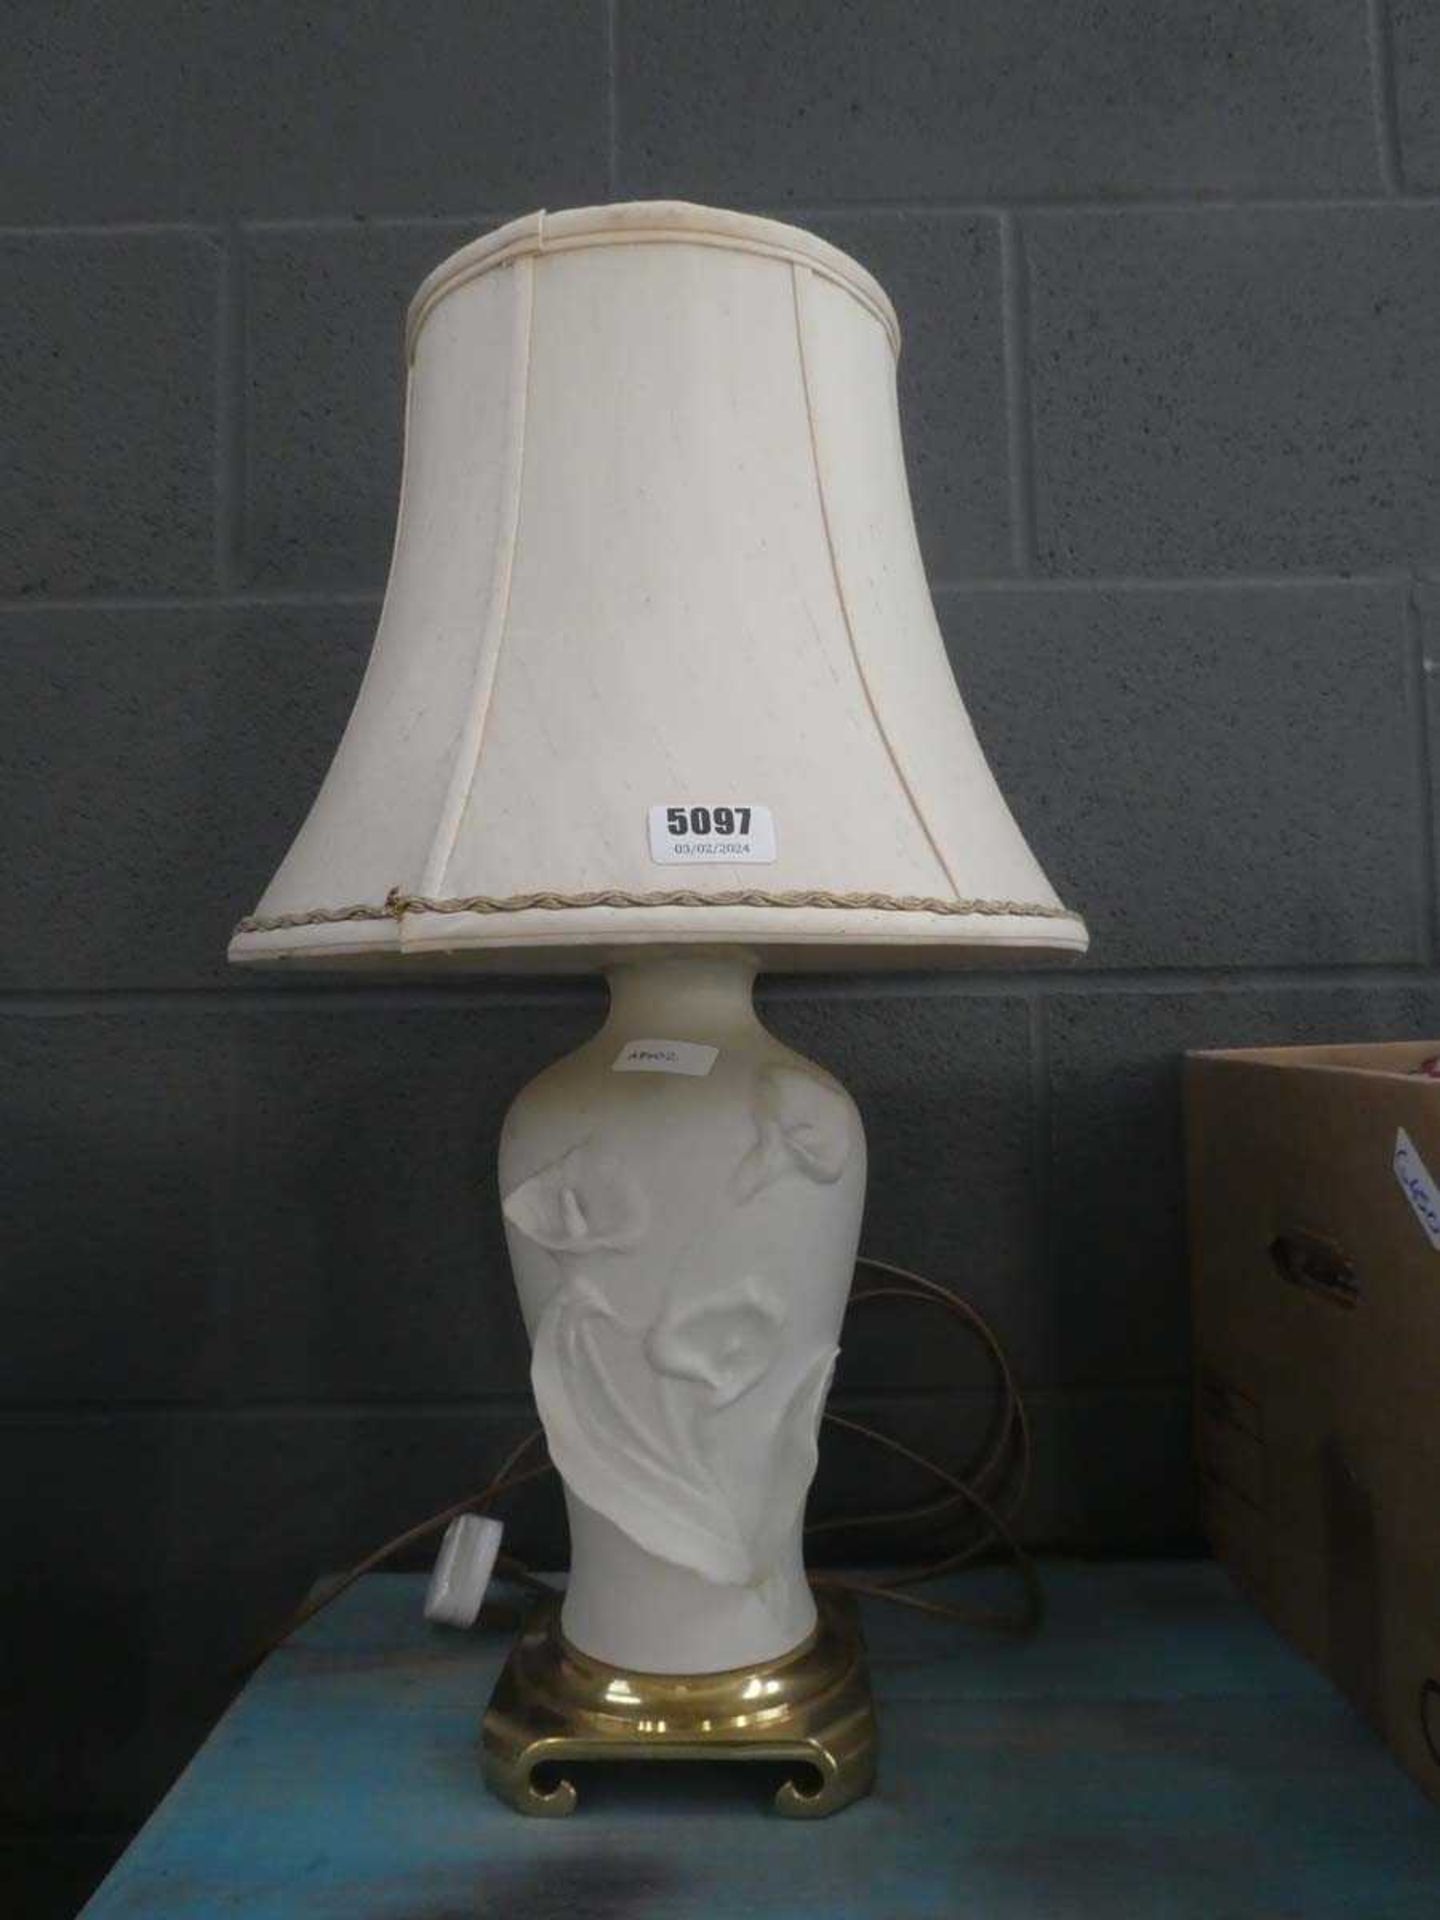 Lily patterned table lamp with shade